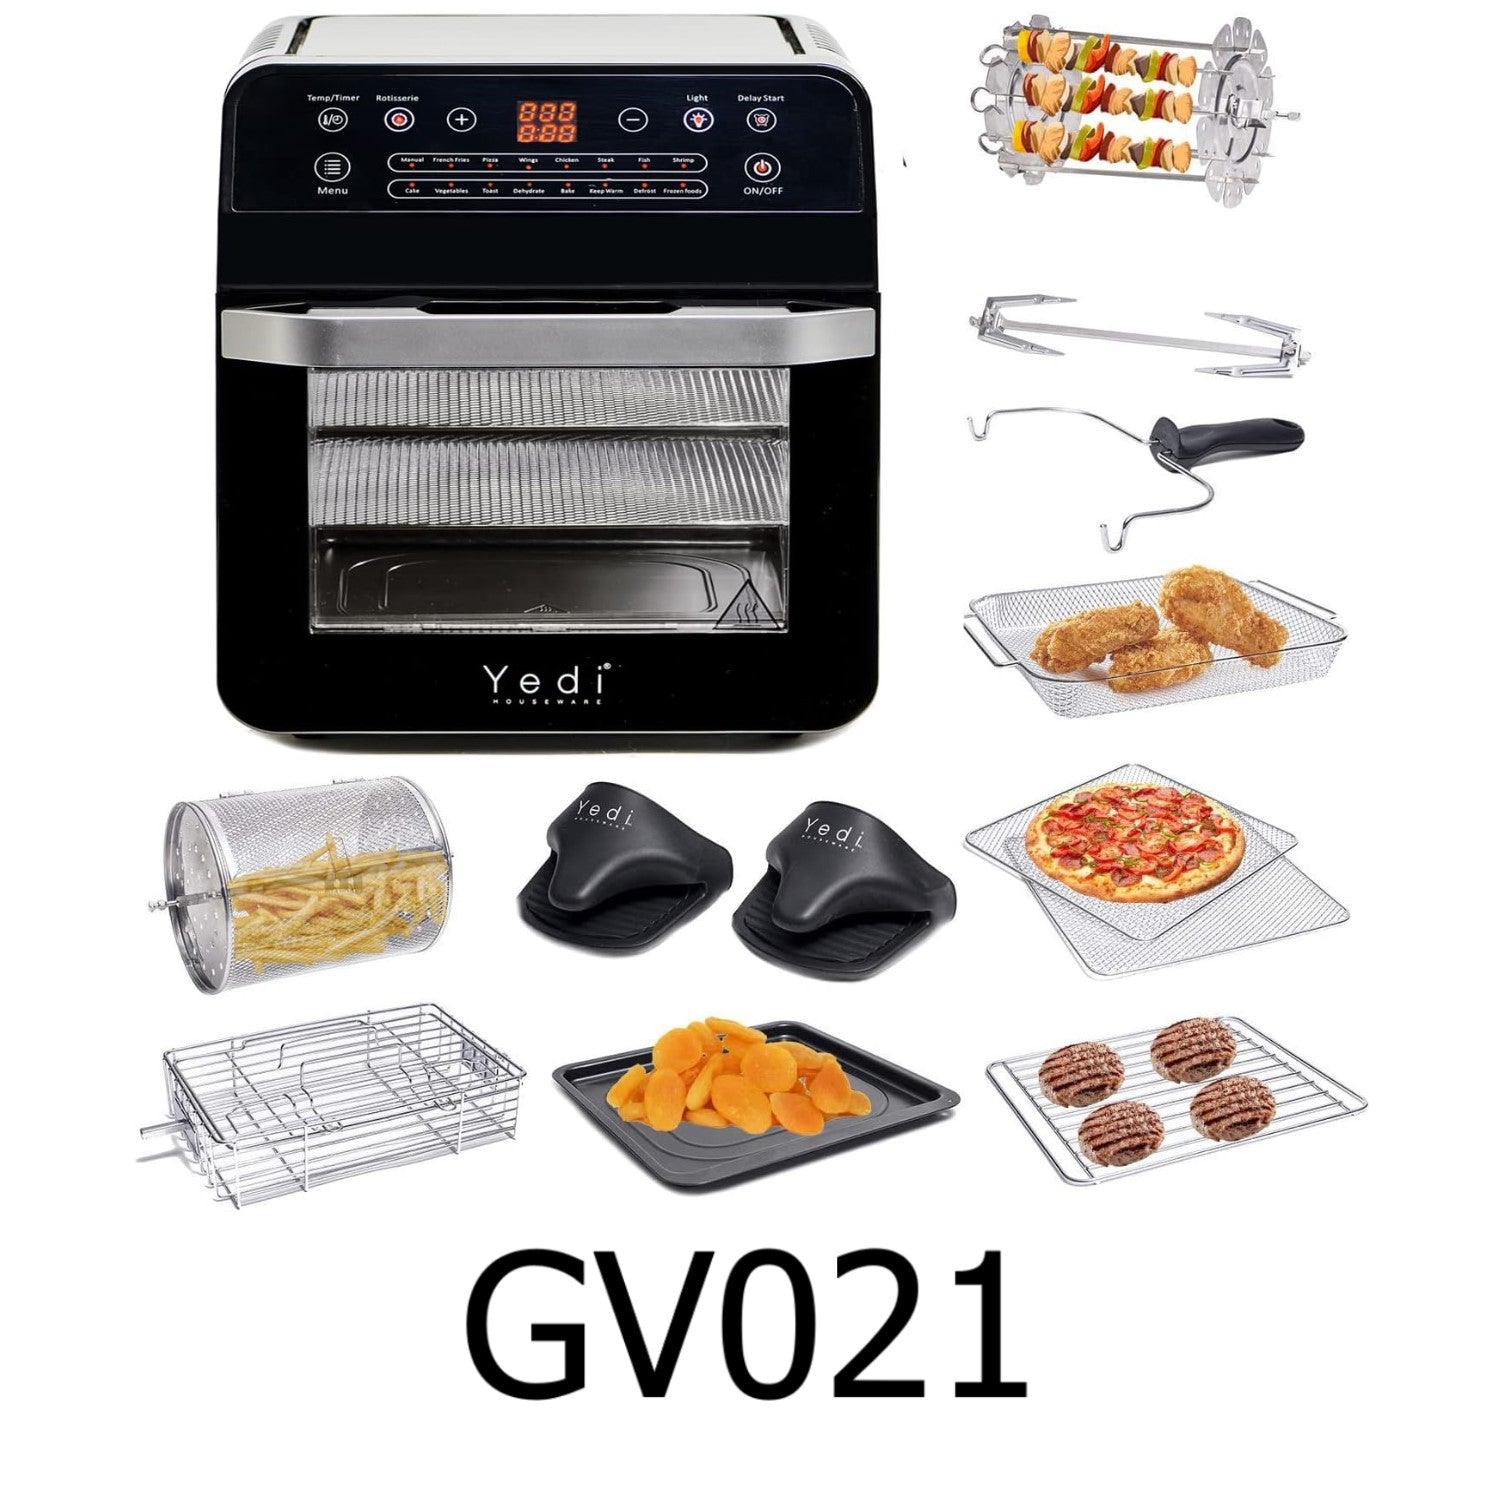 12.7 QT Yedi Air Fryer Oven with Rotisserie and Dehydrator – R & B Import